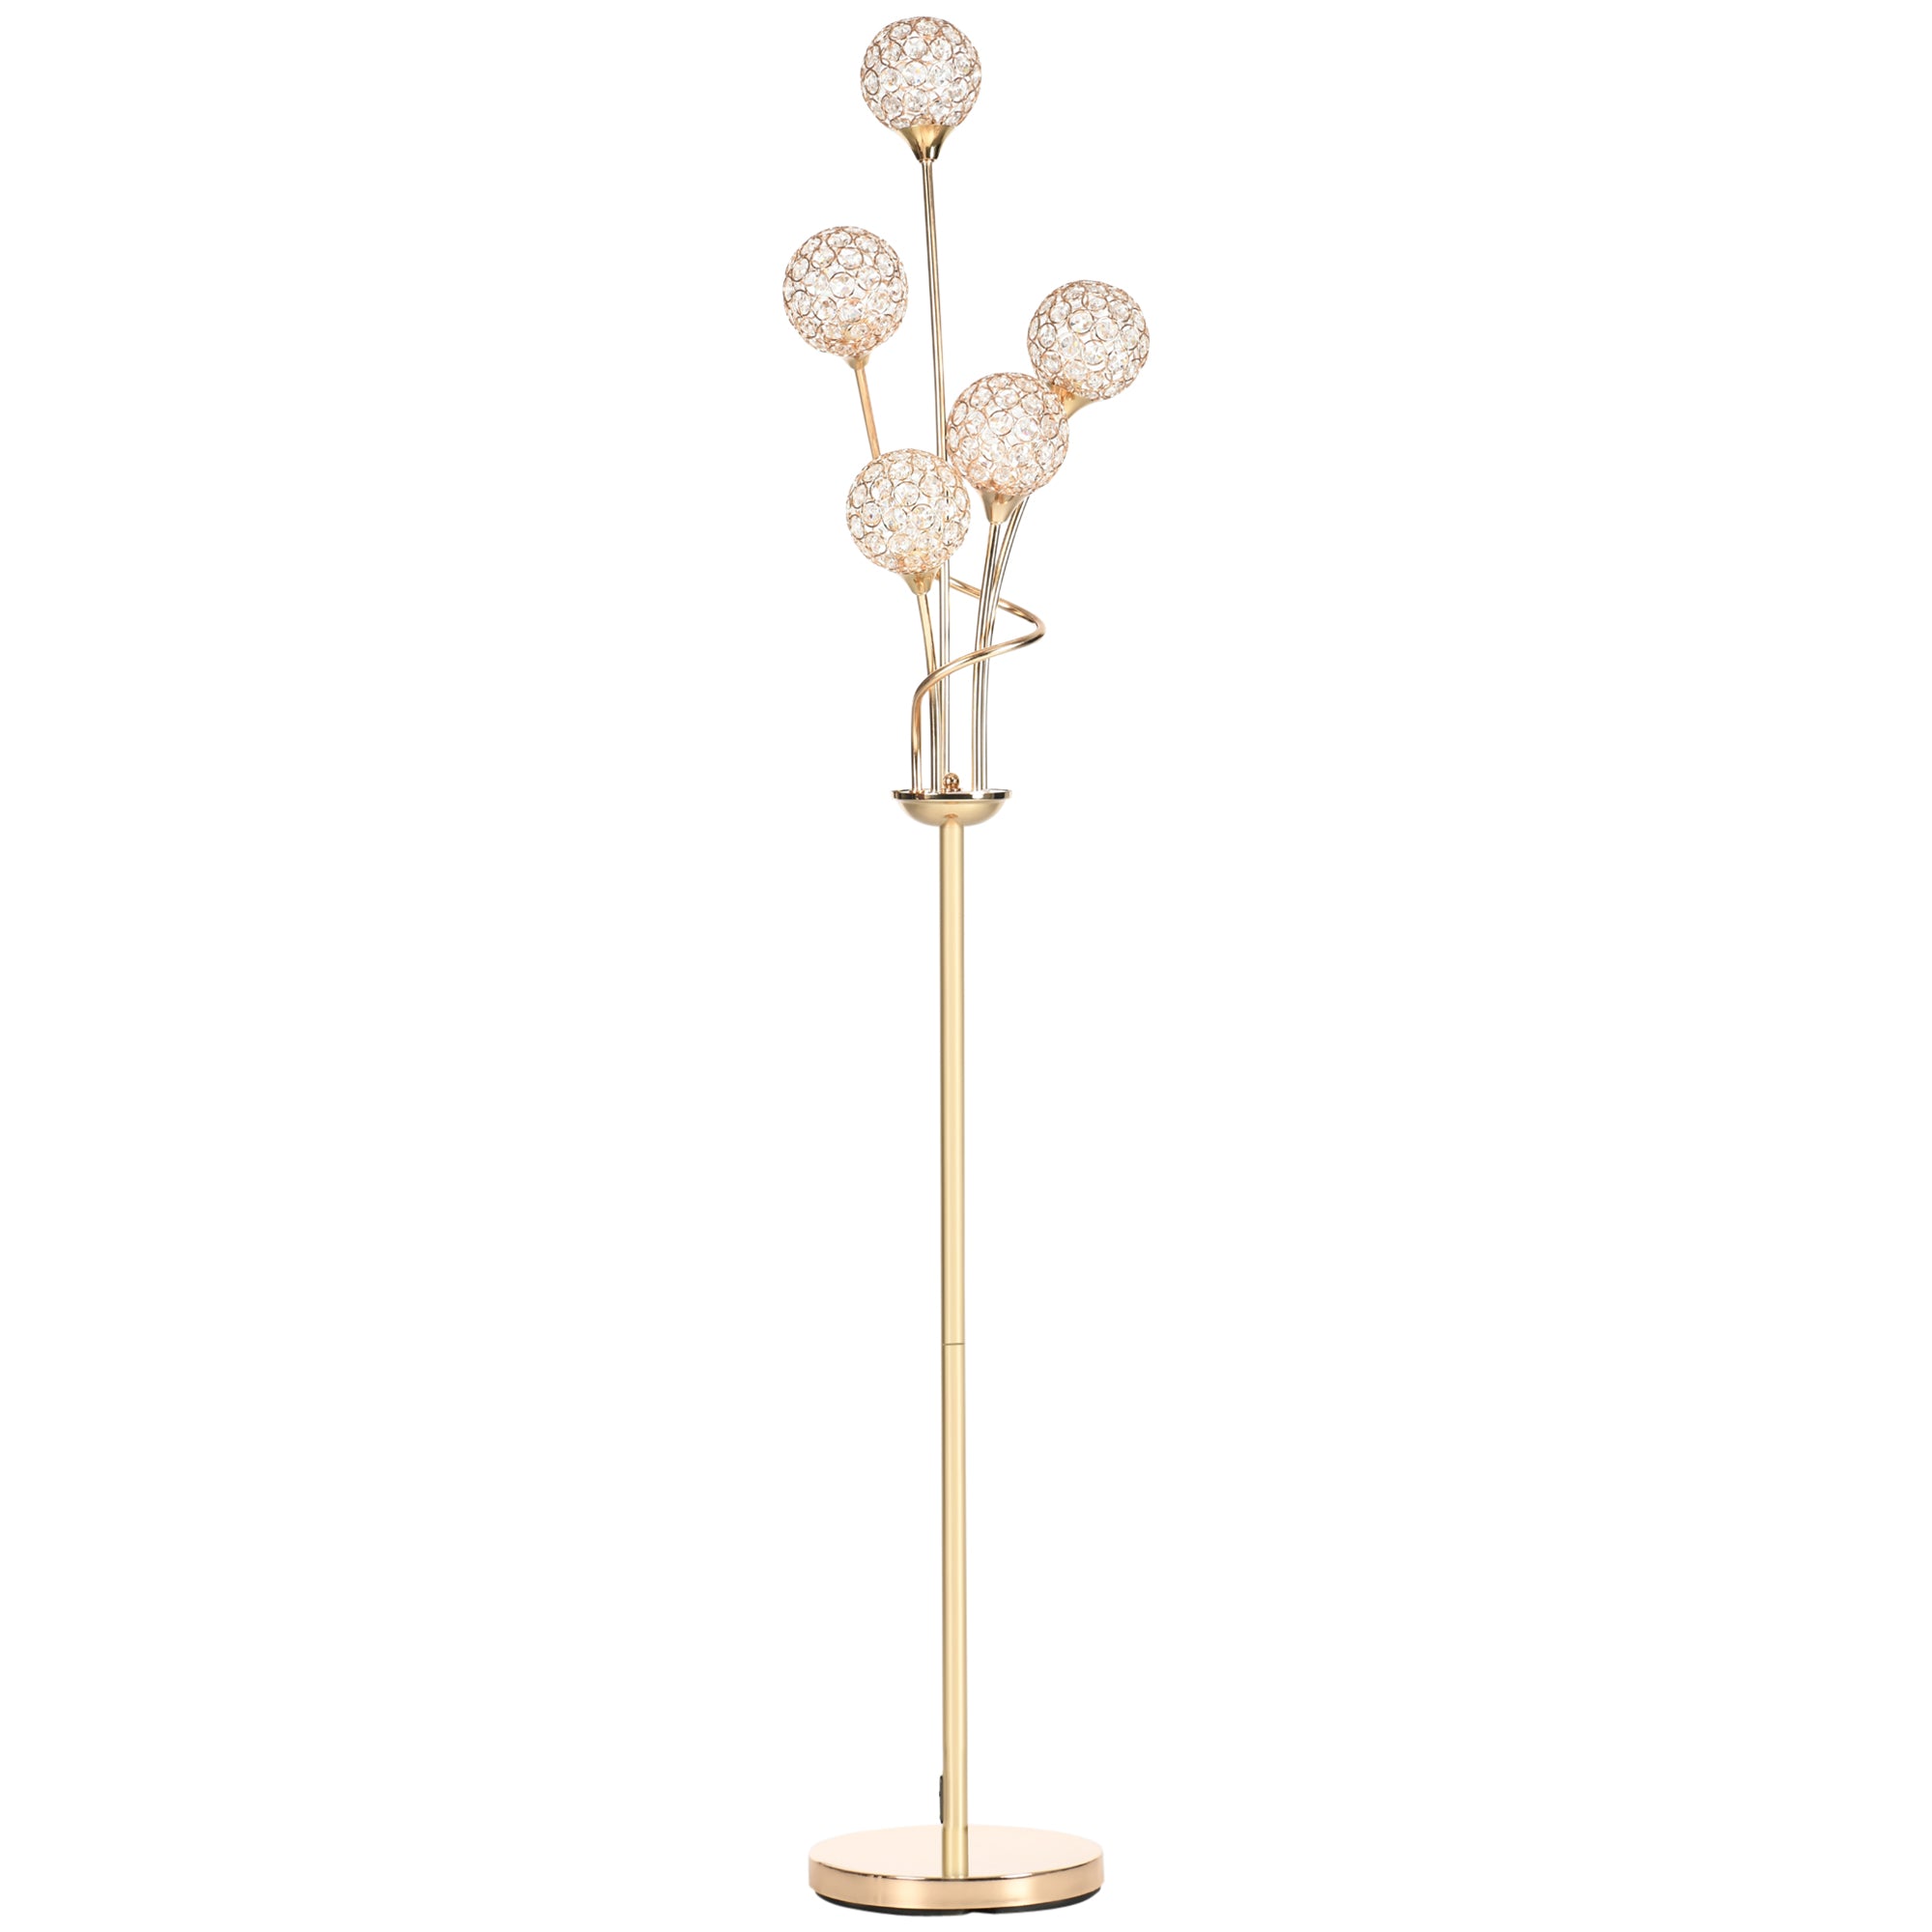 Crystal Floor Lamps for Living Room Bedroom with 5 Light, Modern Upright Standing Lamp, 34x25x156cm, Gold Tone  AOSOM   